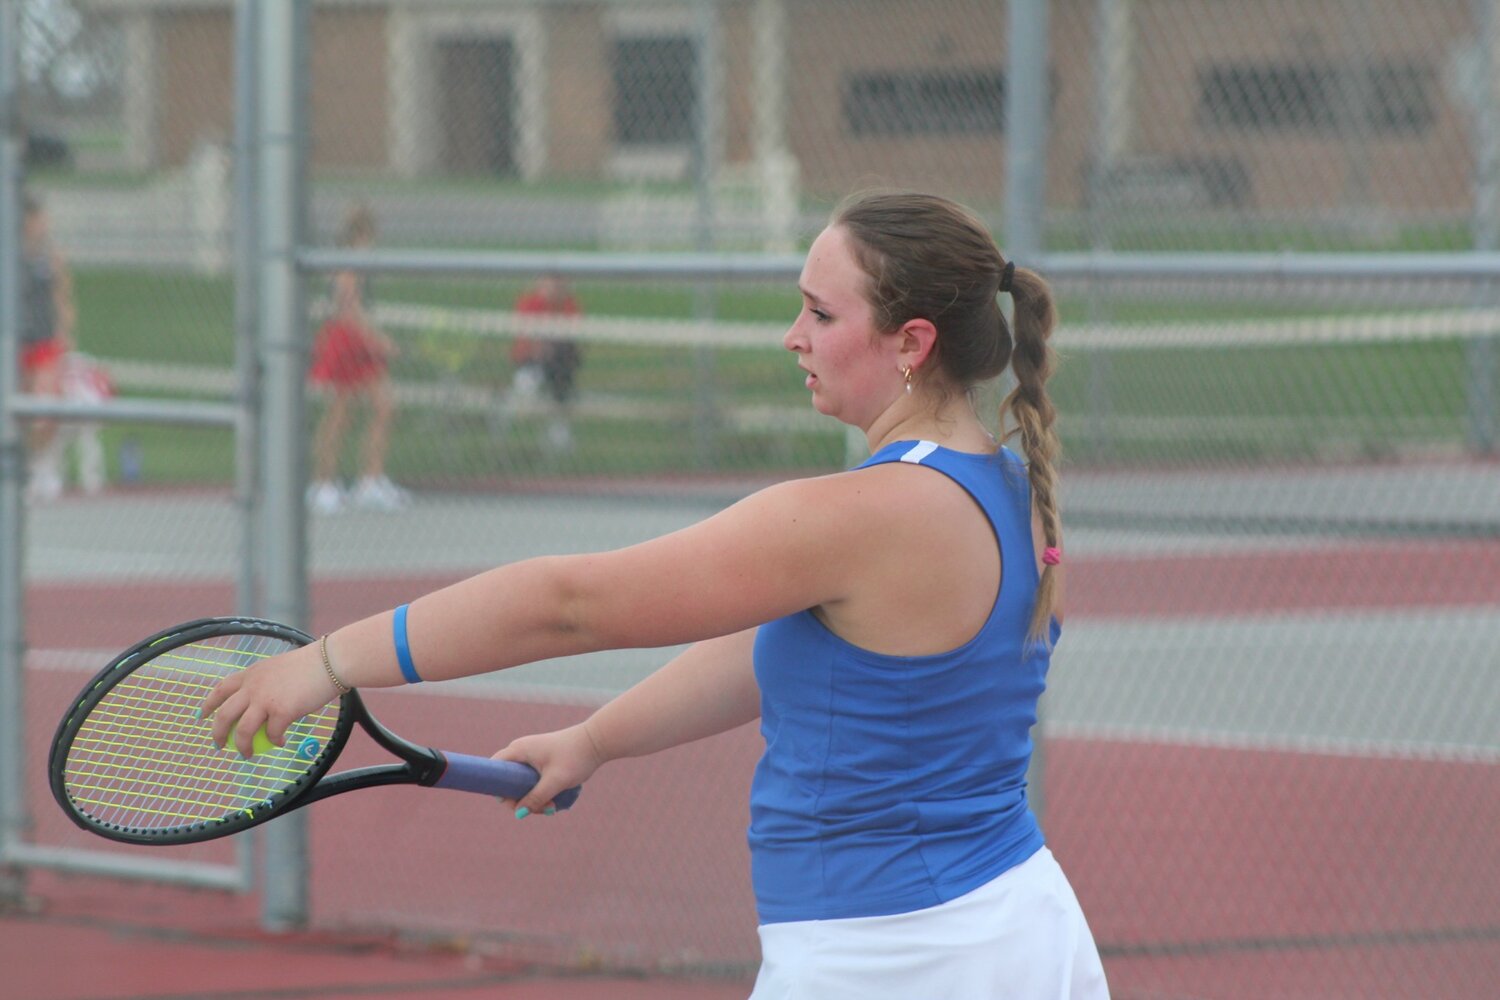 Senior and No. 1 singles player Sam Rohr helped lead CHS to a 4-1 county win over Southmont on Tuesday.